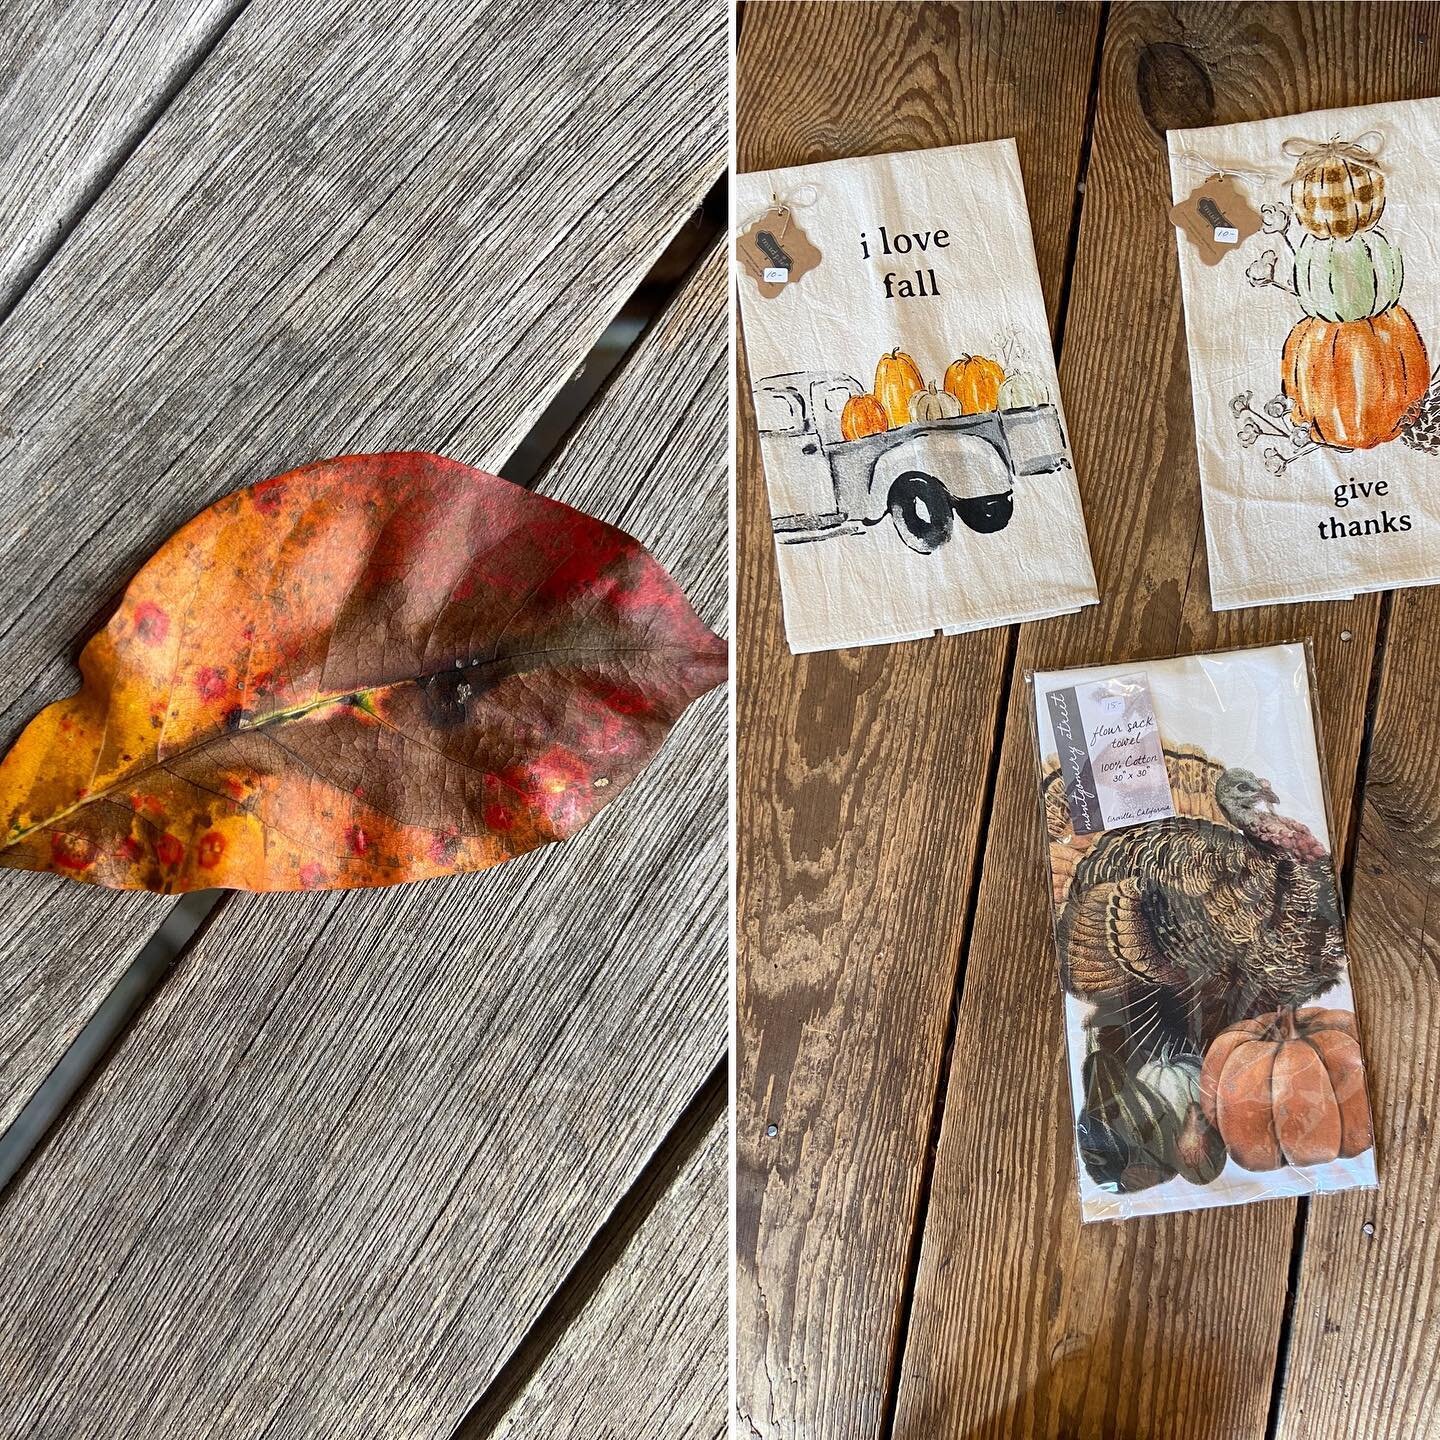 Oh my!! One more day in August&hellip; leaves 🍁🍂are starting to change&hellip; Fall towels are in stock &amp; out on the floor $10. Hurry they won&rsquo;t last. Perfect hostess gift. See you soon. #thecookstore #shoplocal #livelocal #falltowels #se